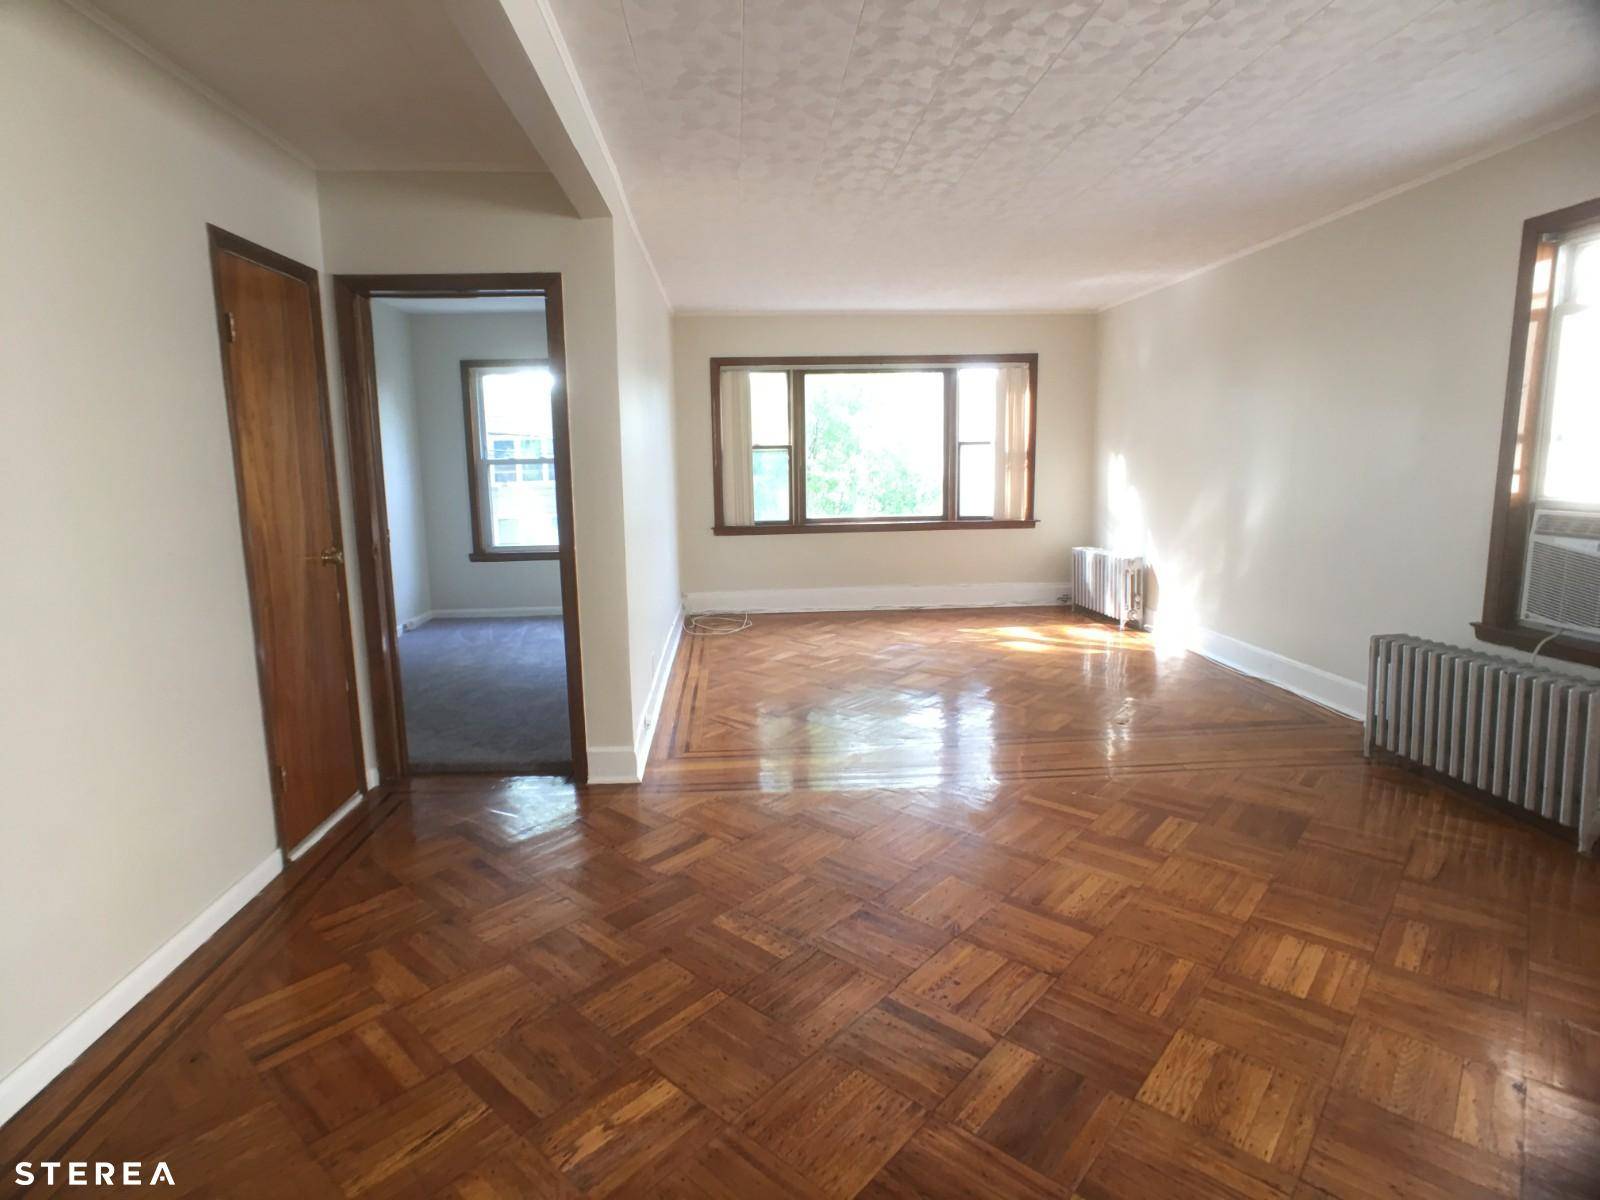 Rent this whole top floor in a 2 family building on one of the most desirable blocks in Astoria.